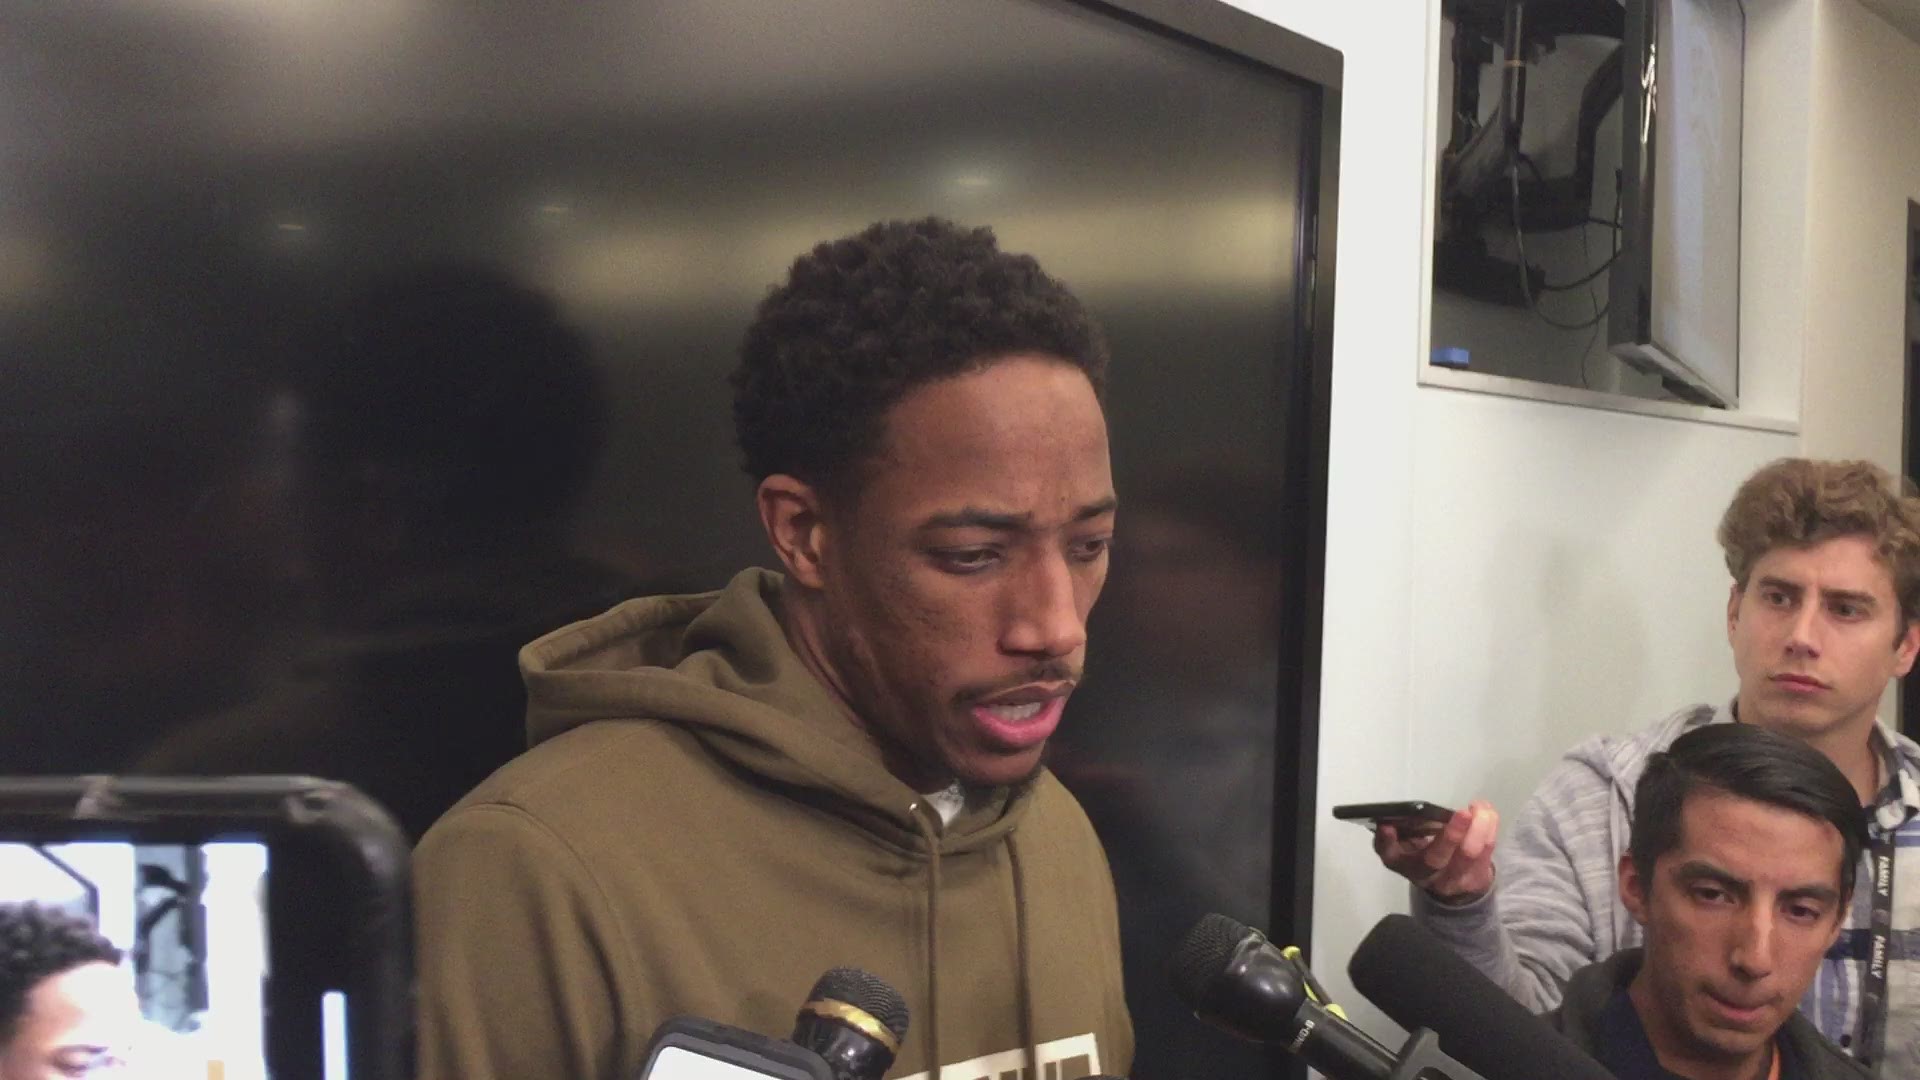 DeMar DeRozan talks about the Spurs; 133-120 win over the Lakers on Thursday night